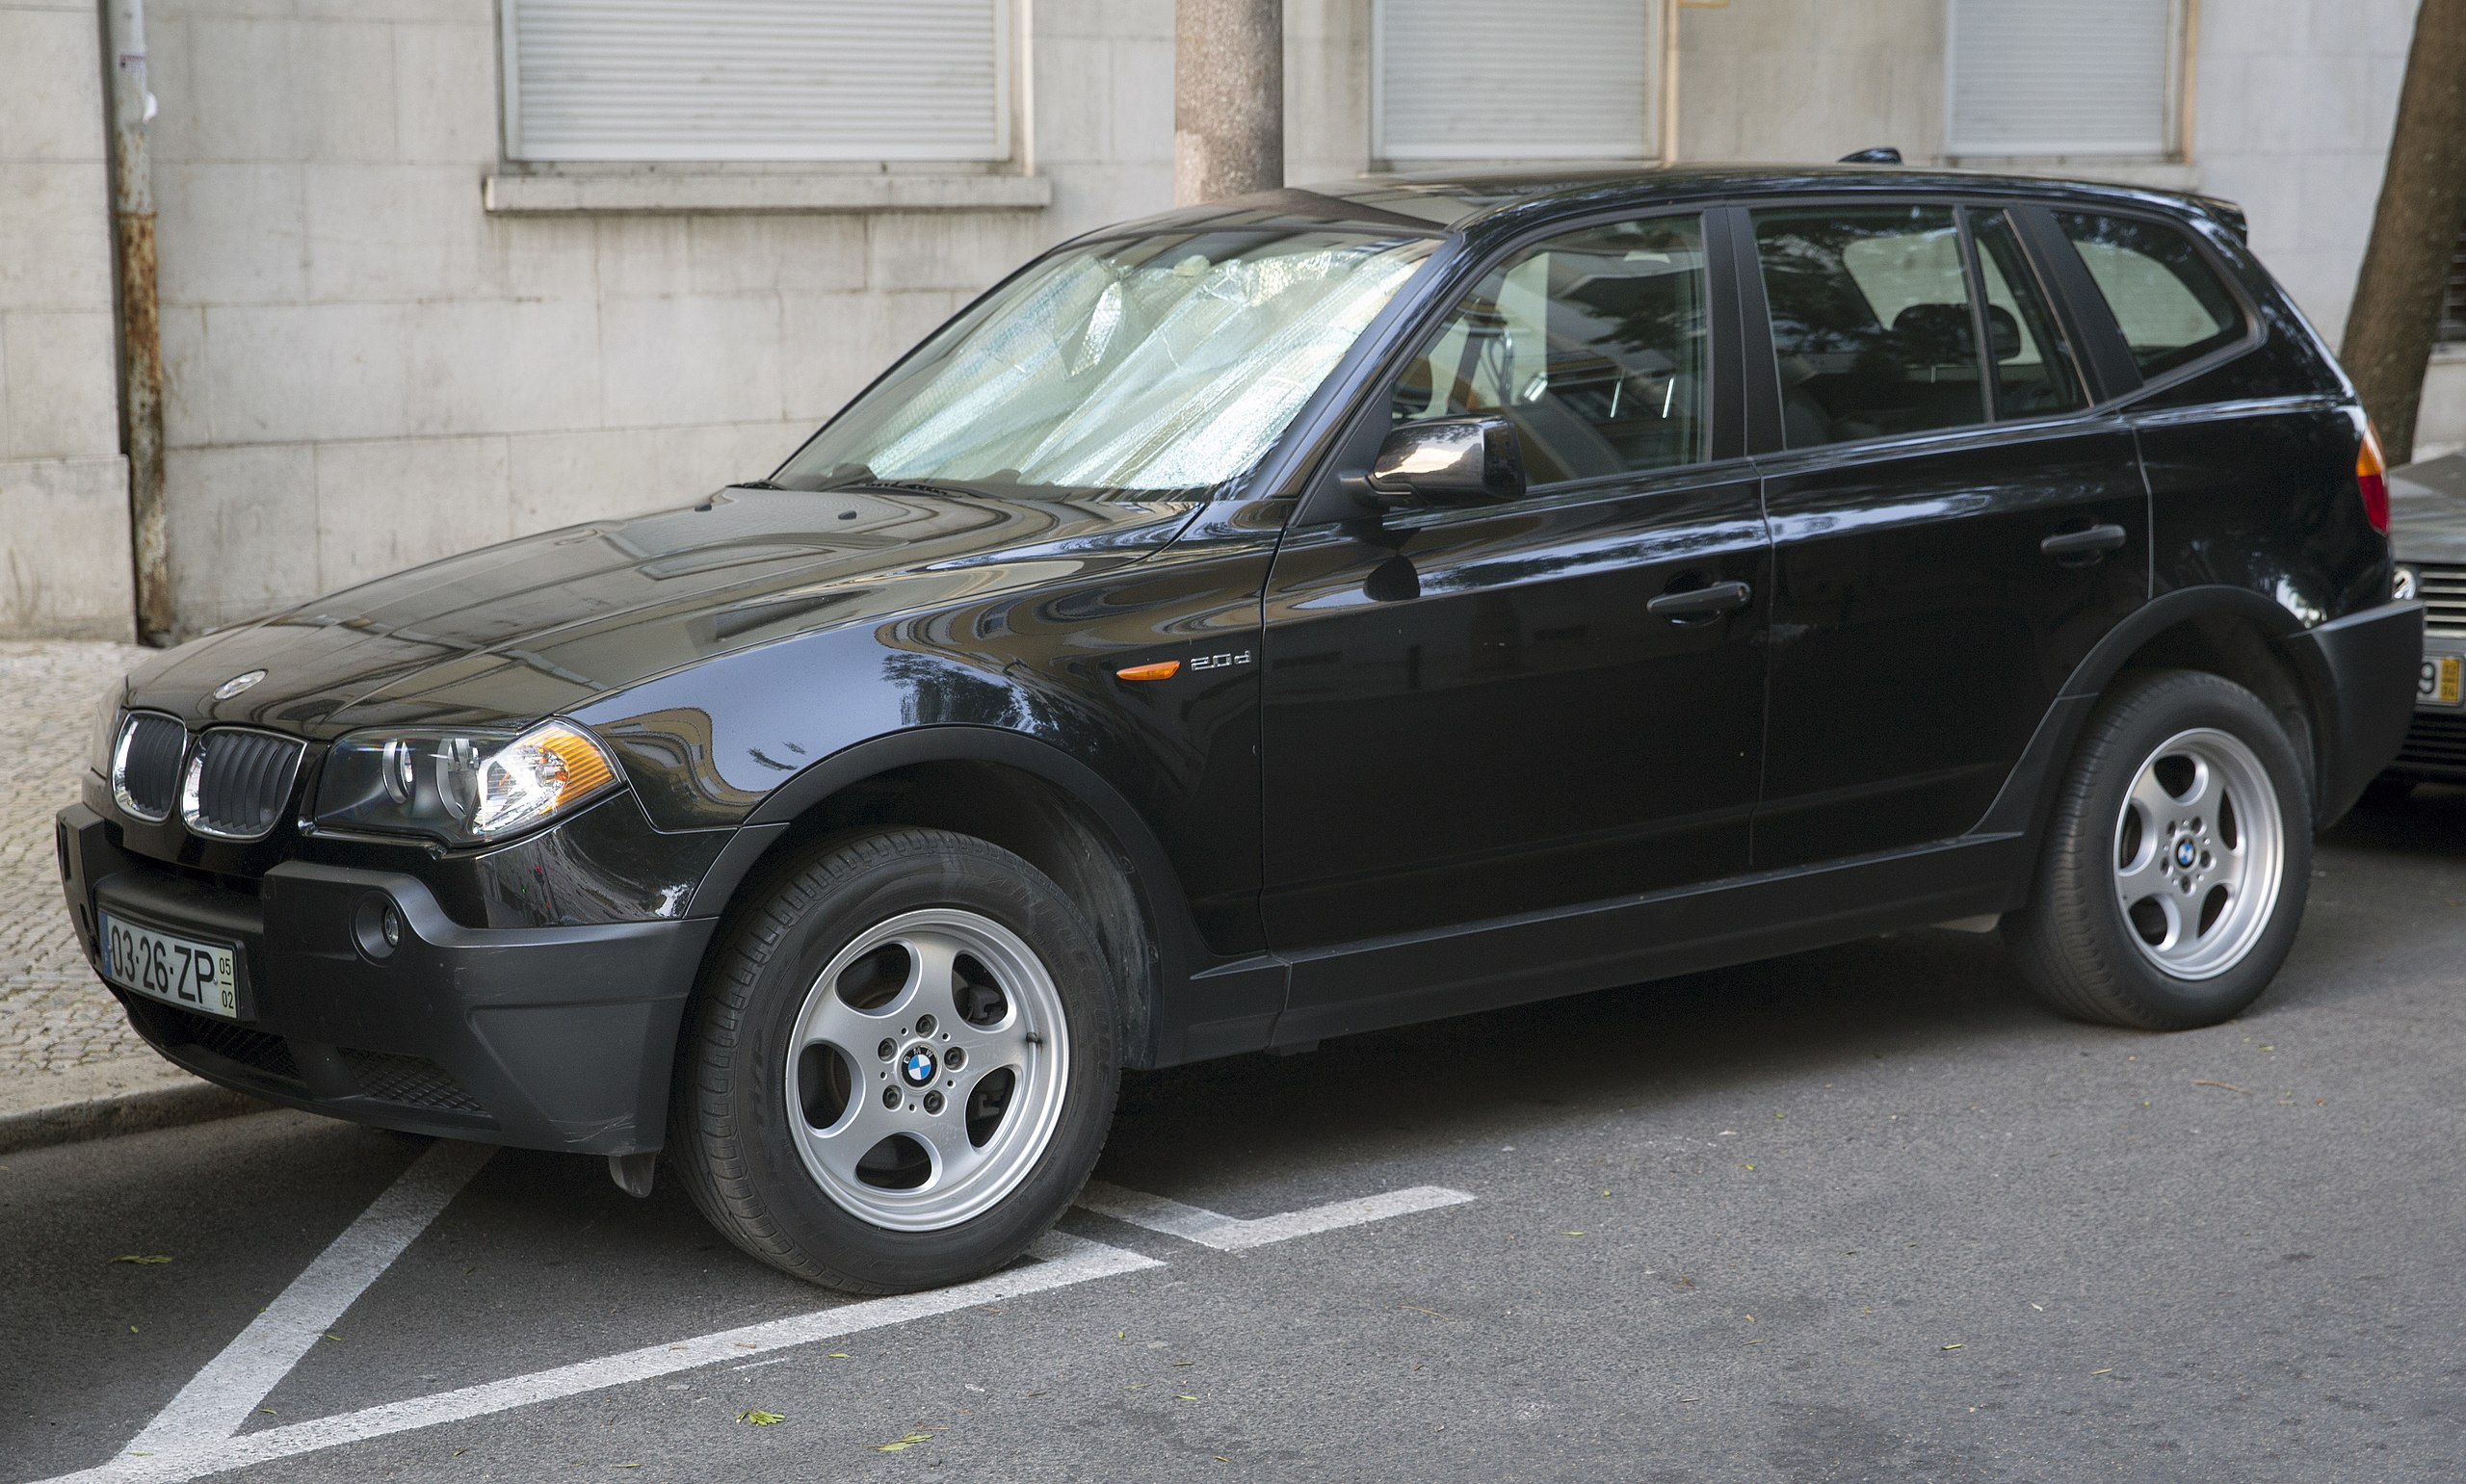 File:2005 BMW X3 2.0d, front left (Portugal).jpg - Wikimedia Commons